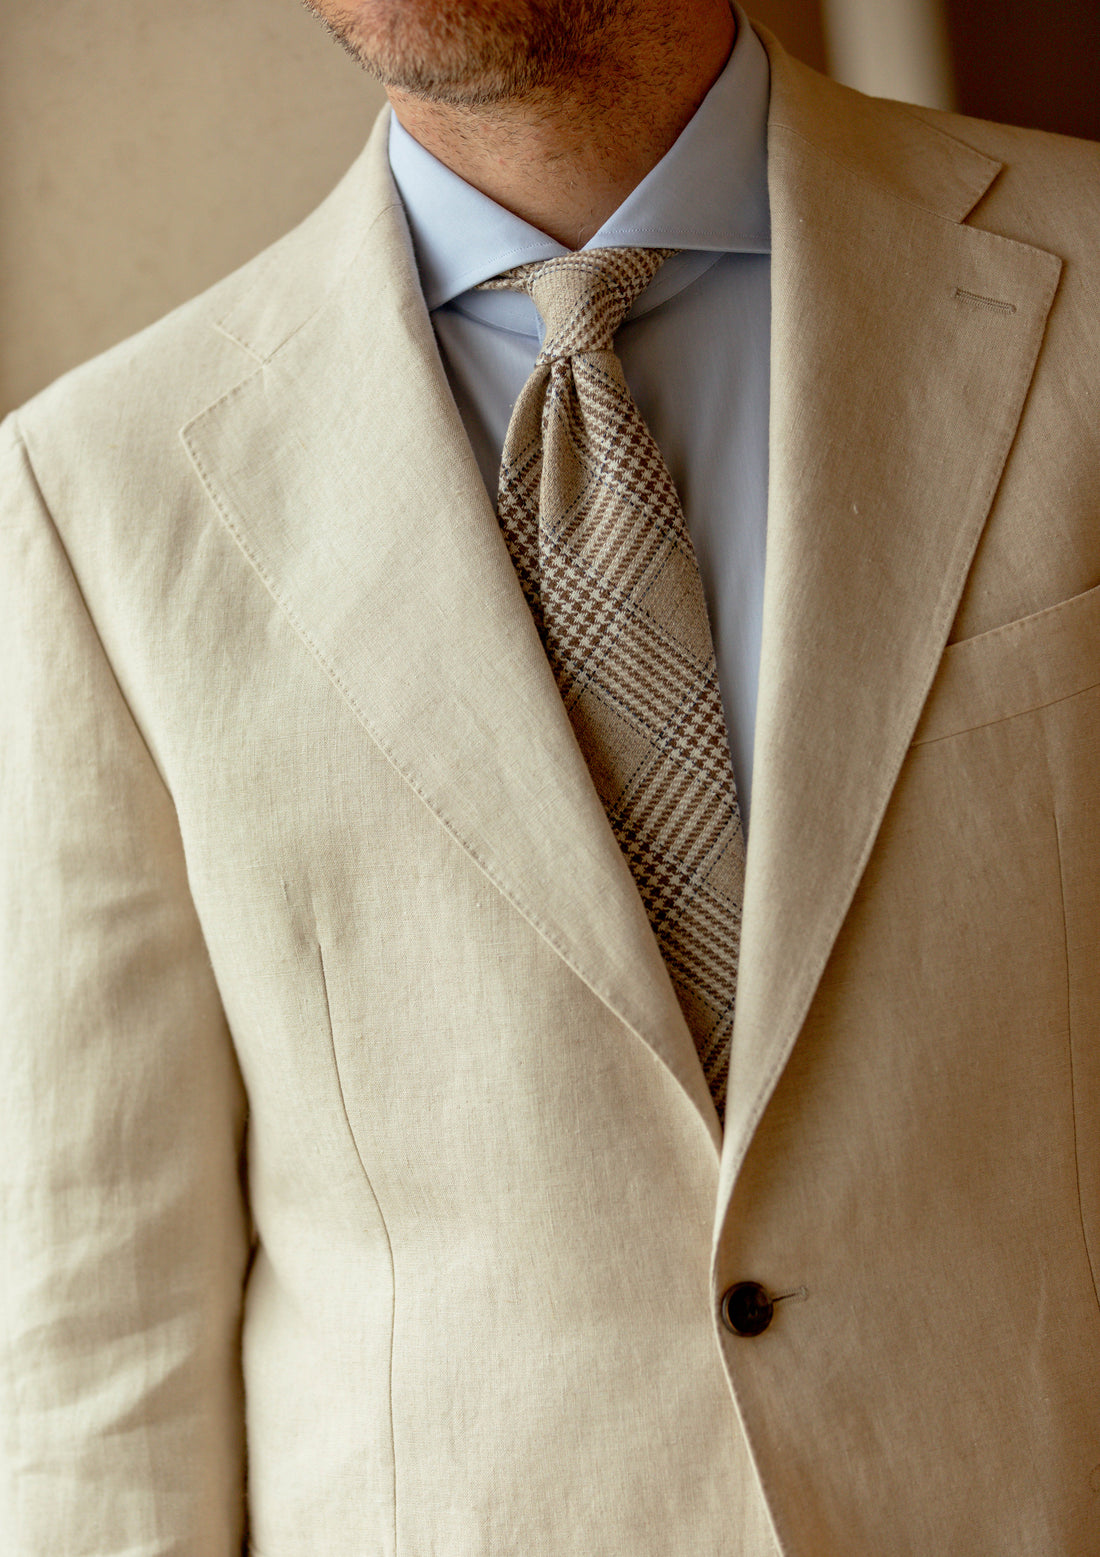 Close-up of a man’s chest wearing a beige suit with a plaid tie and light blue shirt.